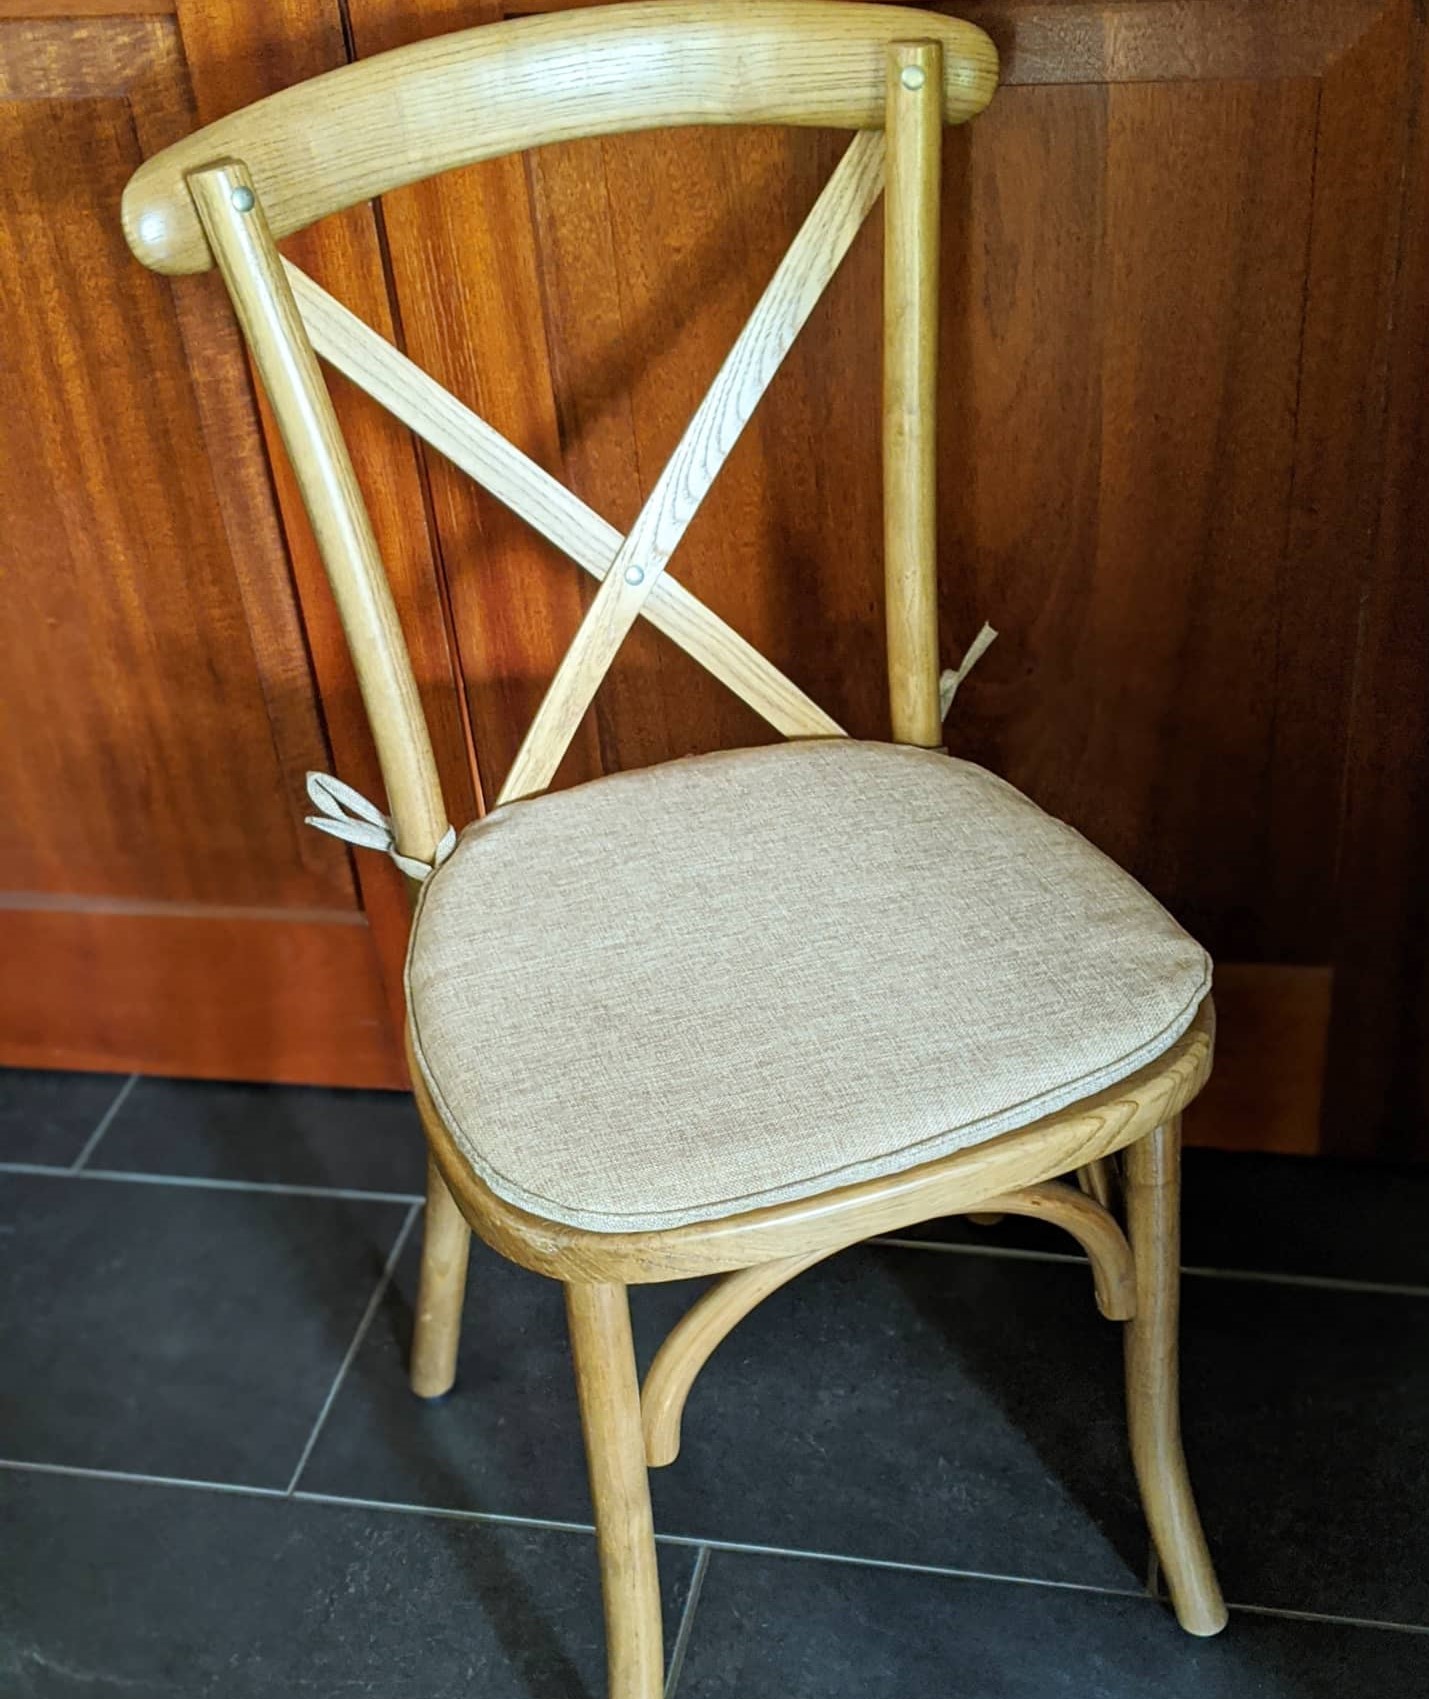 Cross back chair with seat cushion